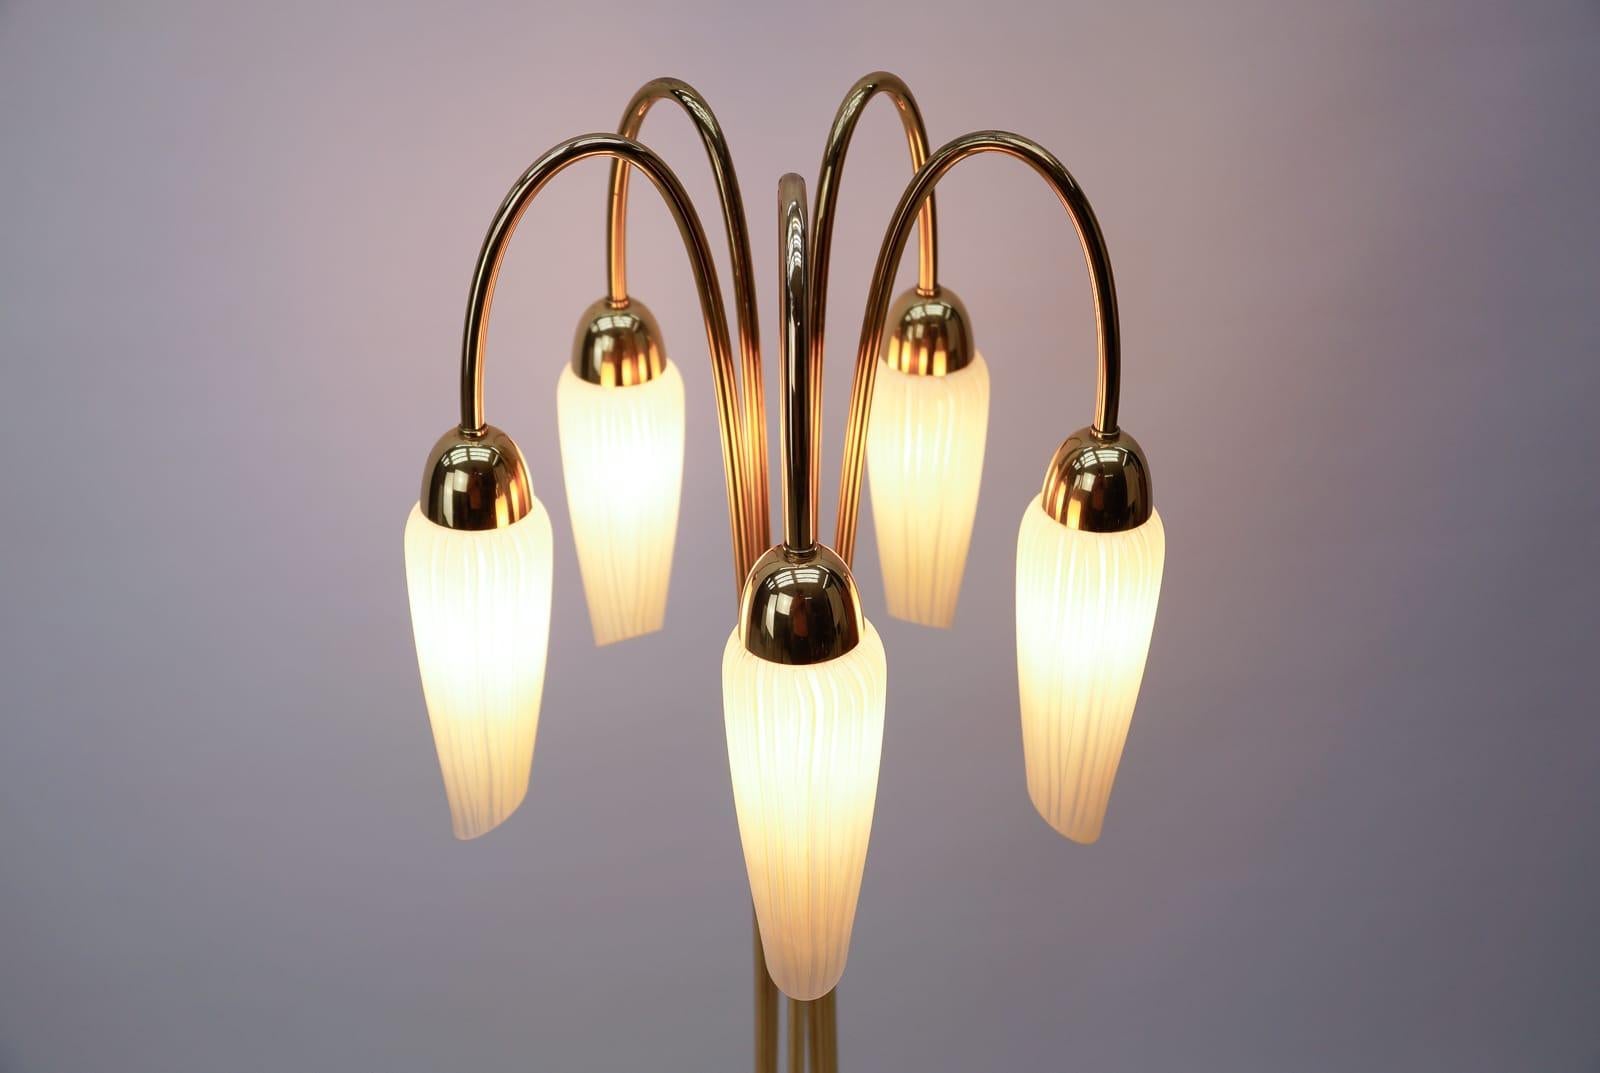 Very Rare Mid-Century Modern Floor Lamp with Five Glass Shades, 1950s Italy For Sale 3